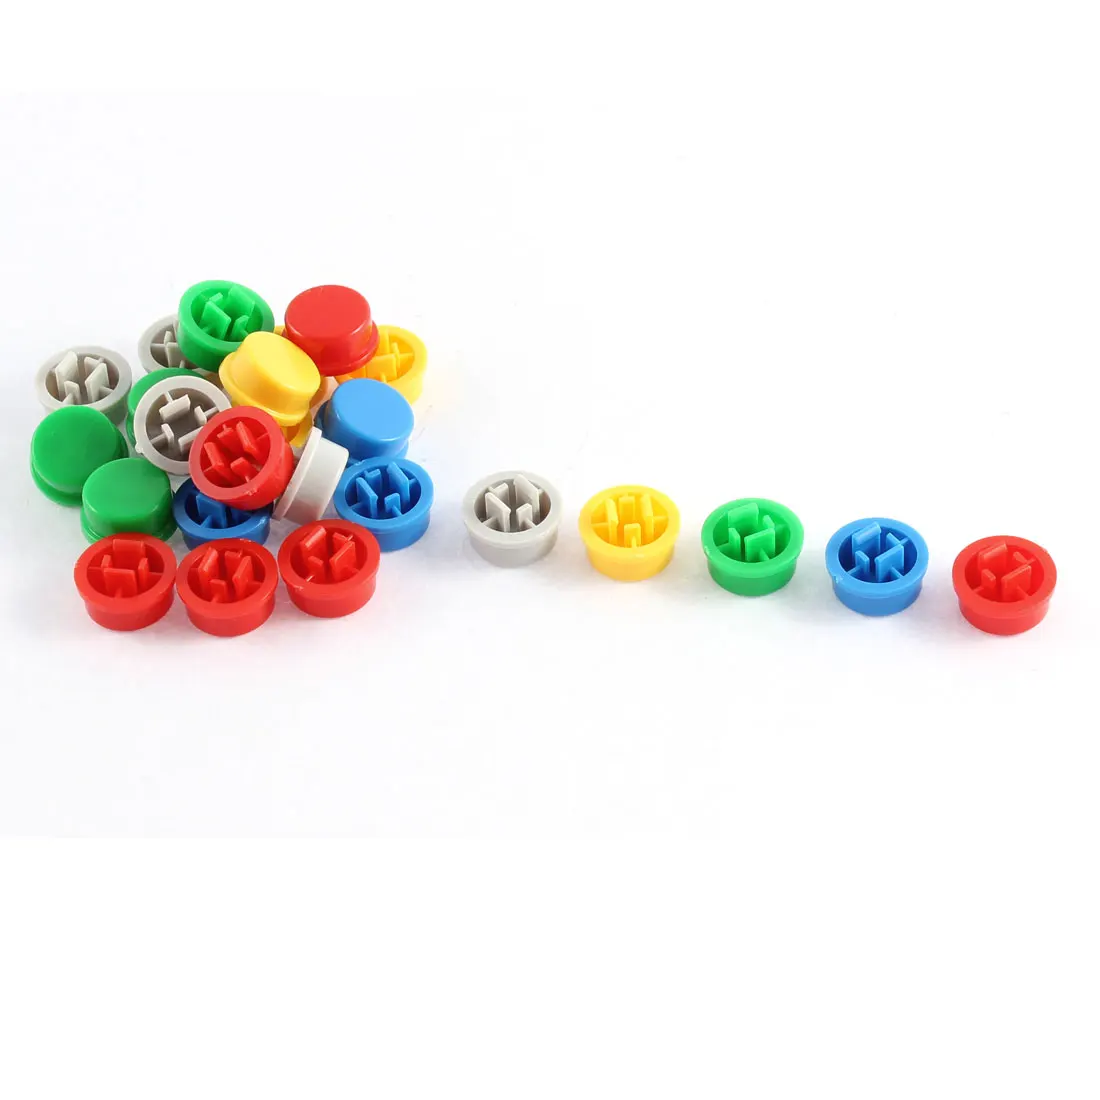 

25Pcs Round Tact Cap Tactile Push Button Switch Caps Assorted Color Pushbutton Cover Fit For 12x12mm Tact Switch